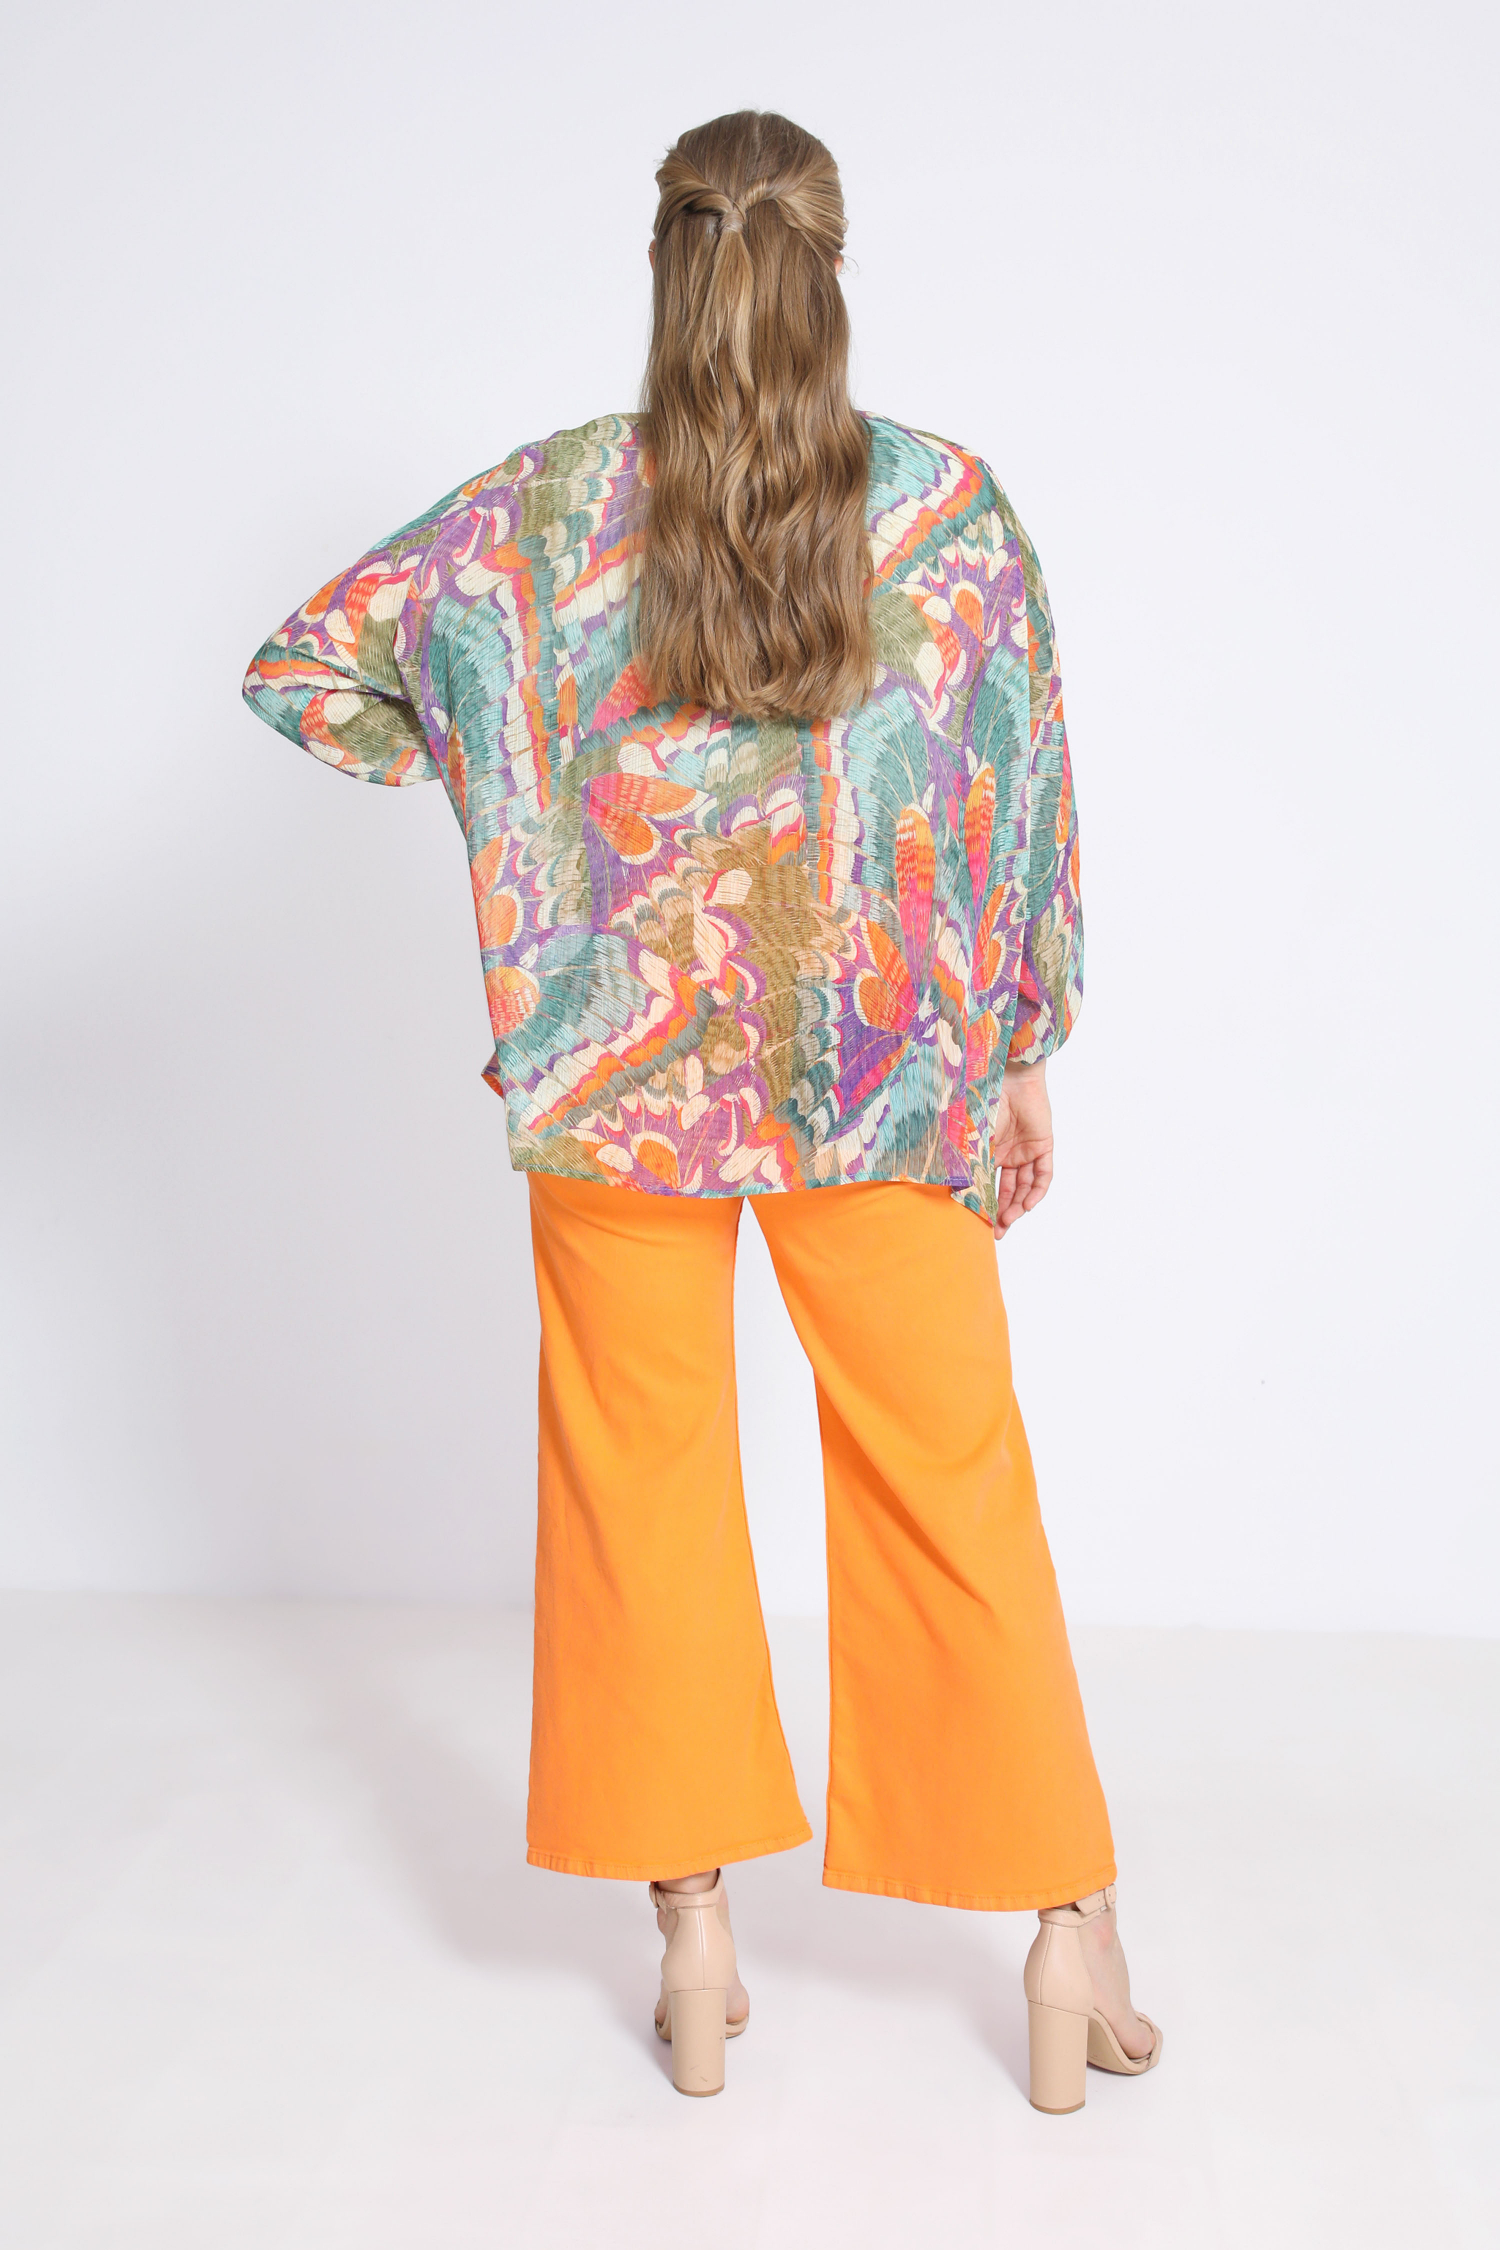 Printed voile blouse lined with a plain top